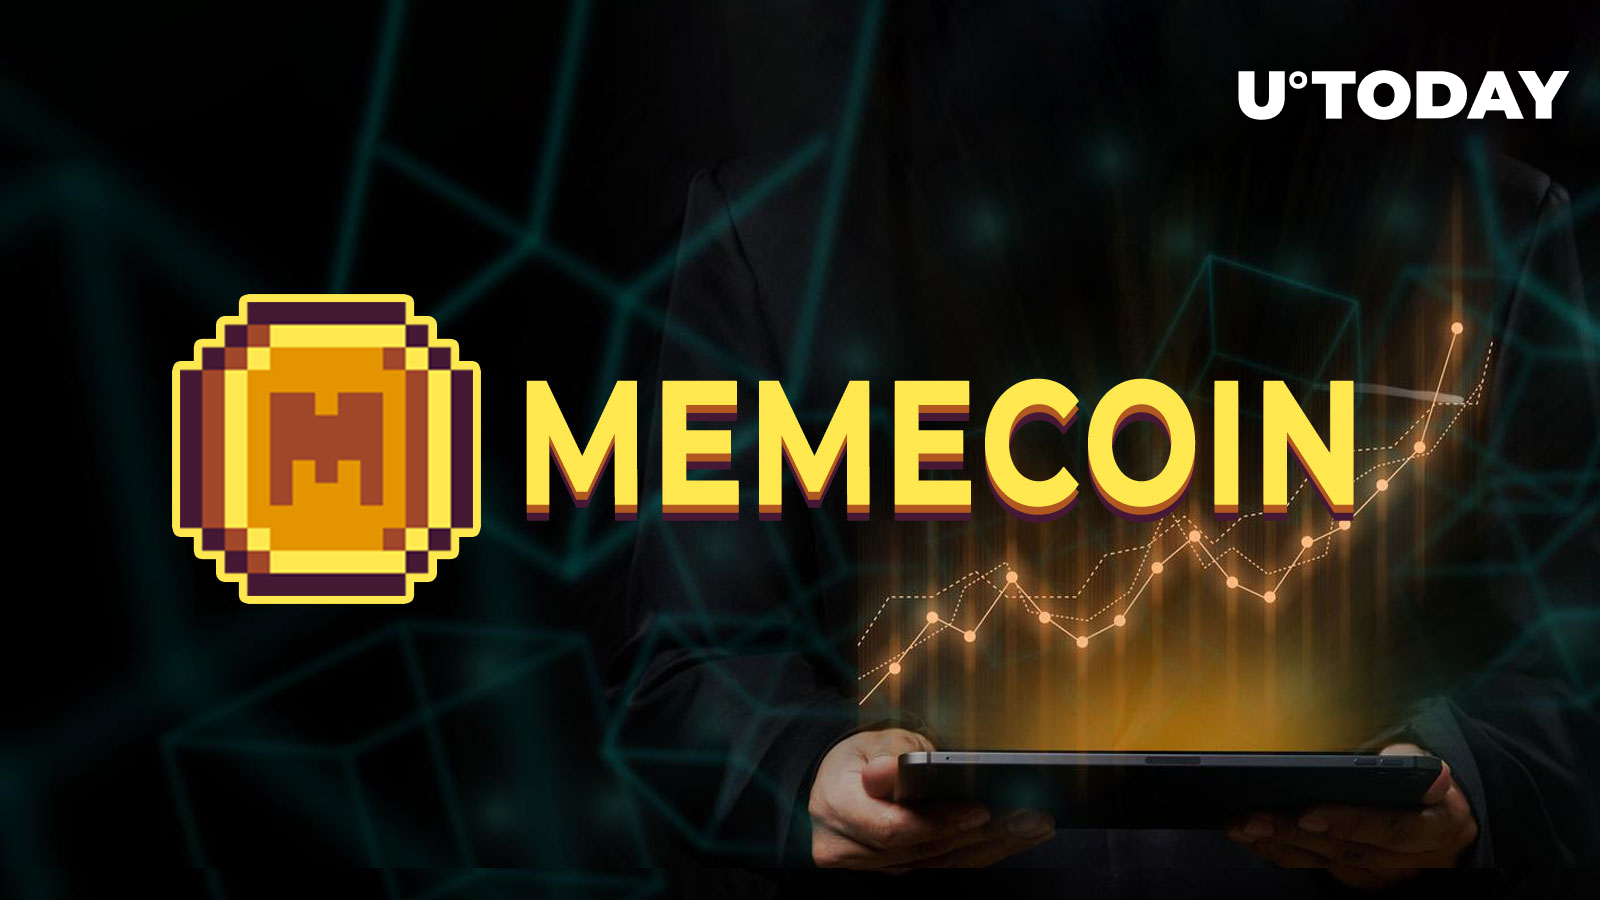 Memecoin (MEME) Sees Meteoric Rise After Major Investment From Binance Labs